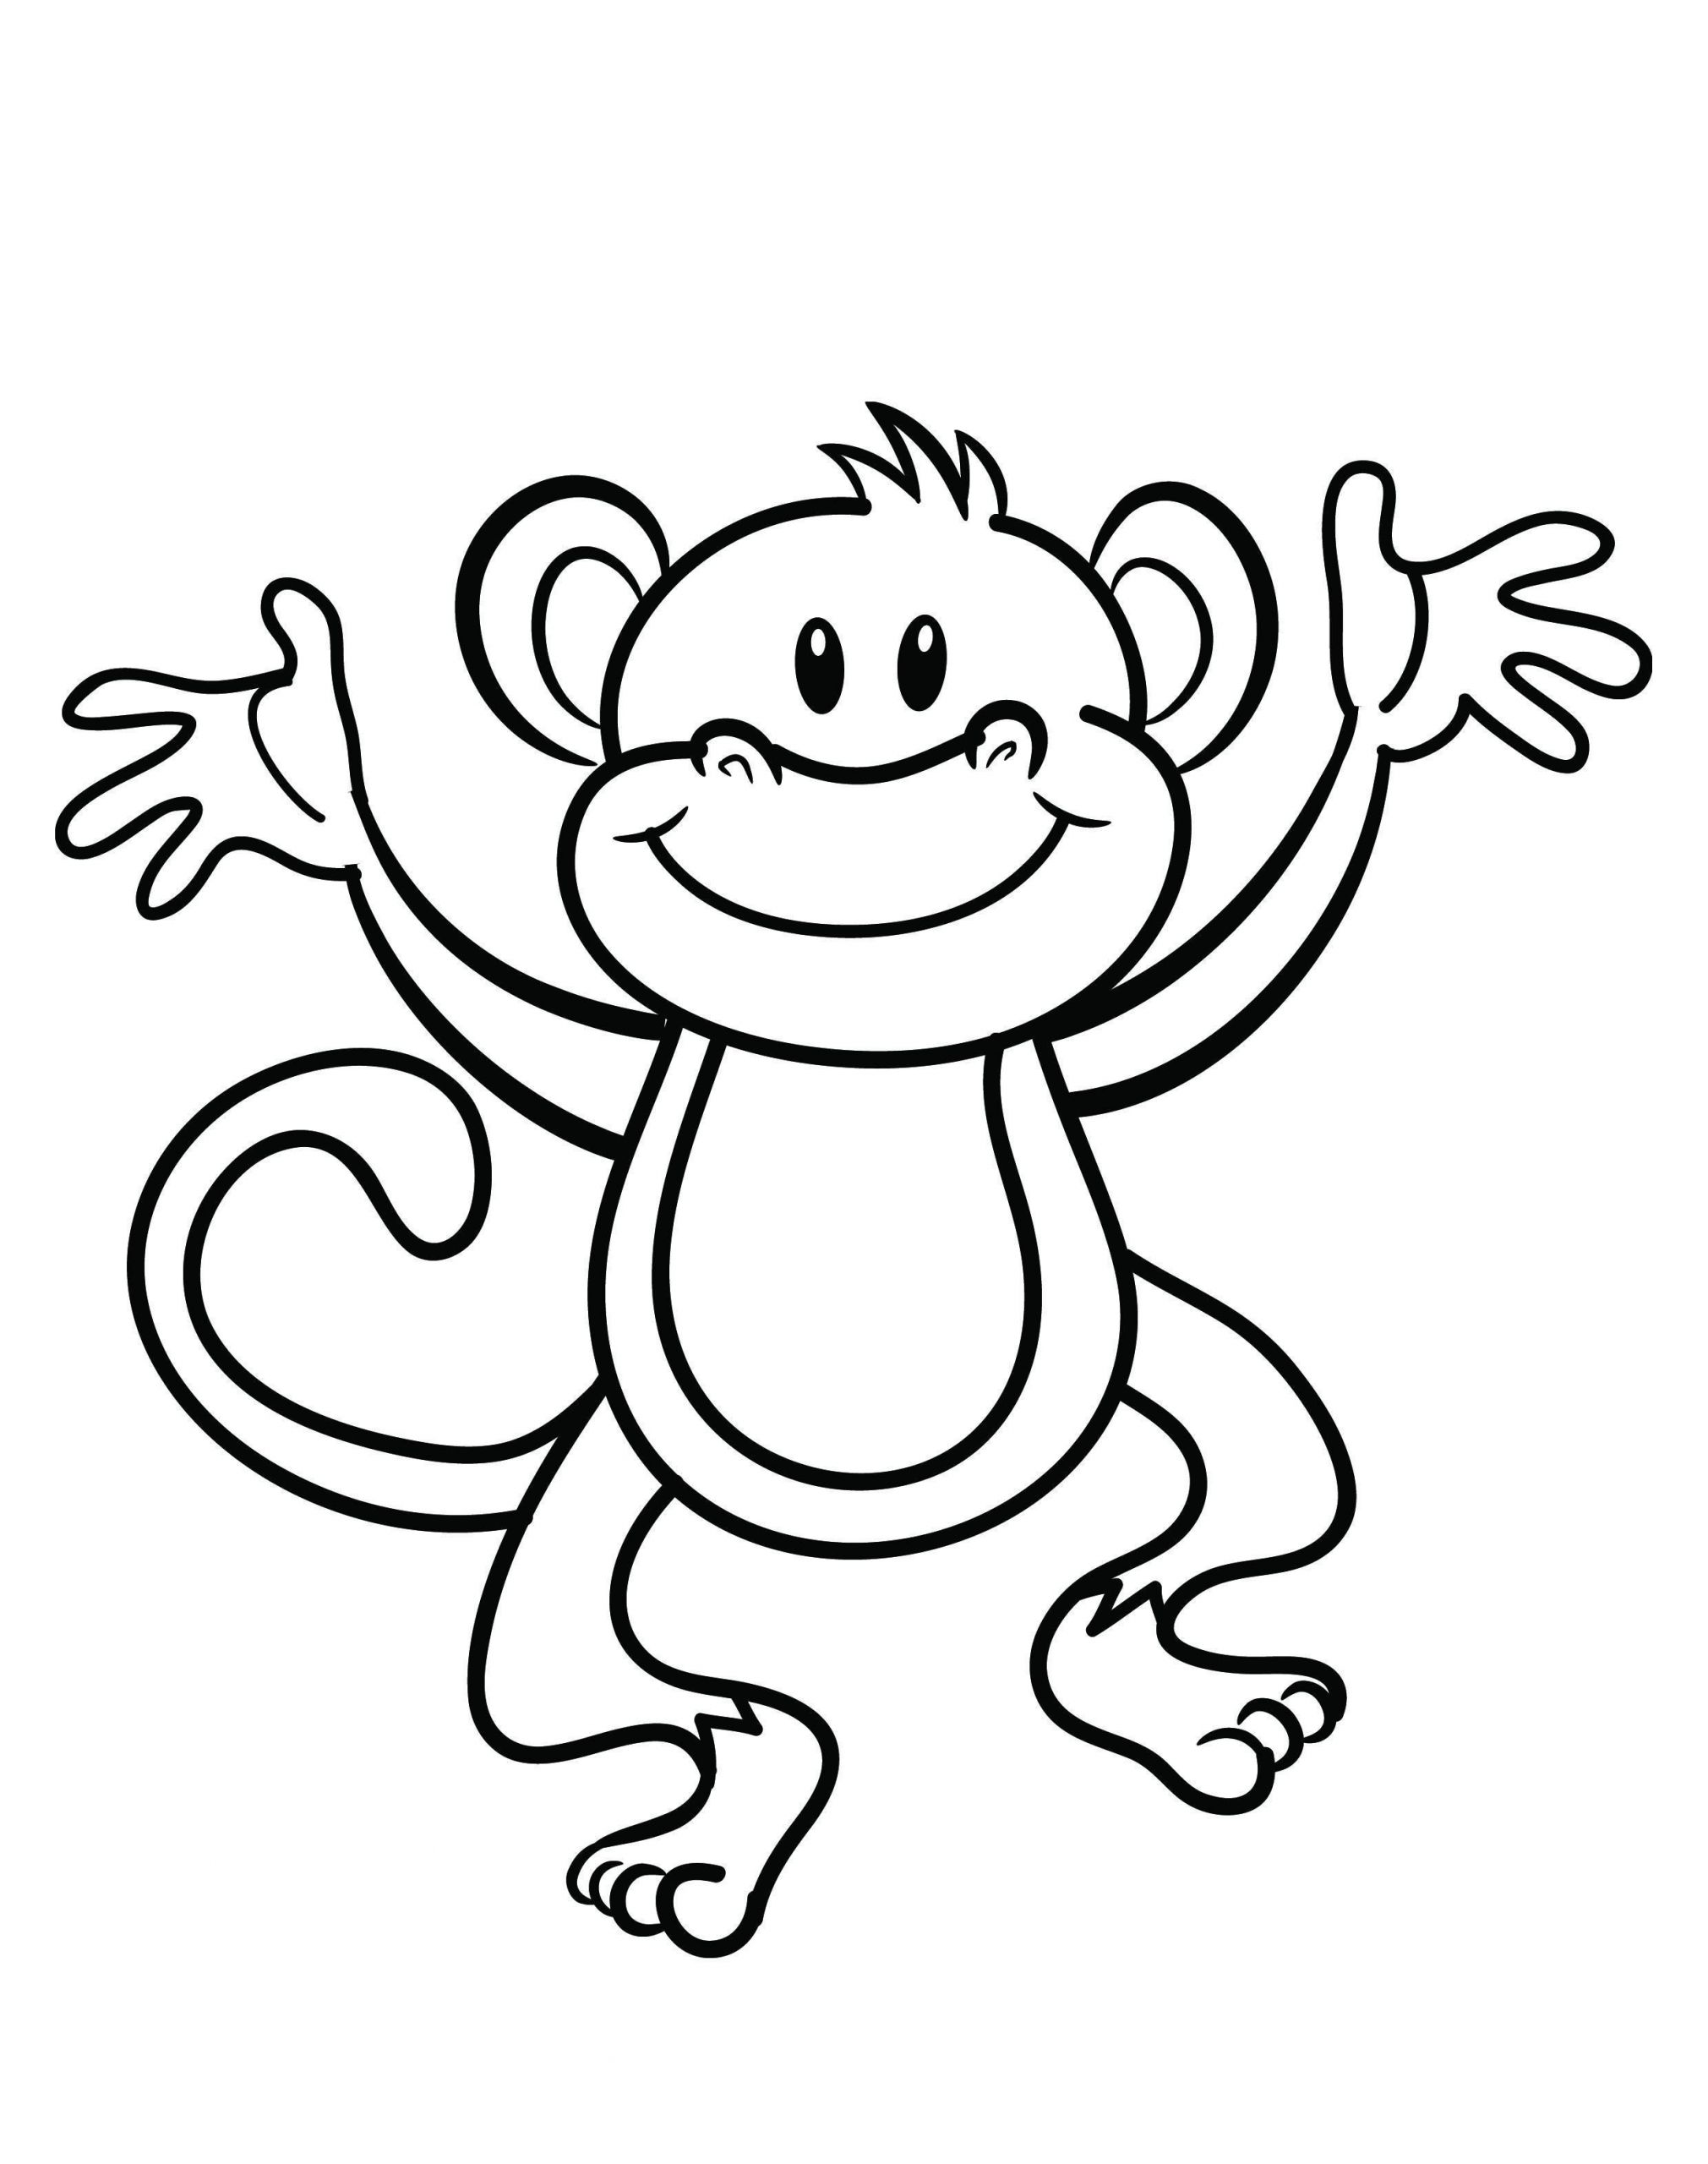 Monkey Coloring Pages For Kids
 Free printable monkey coloring page